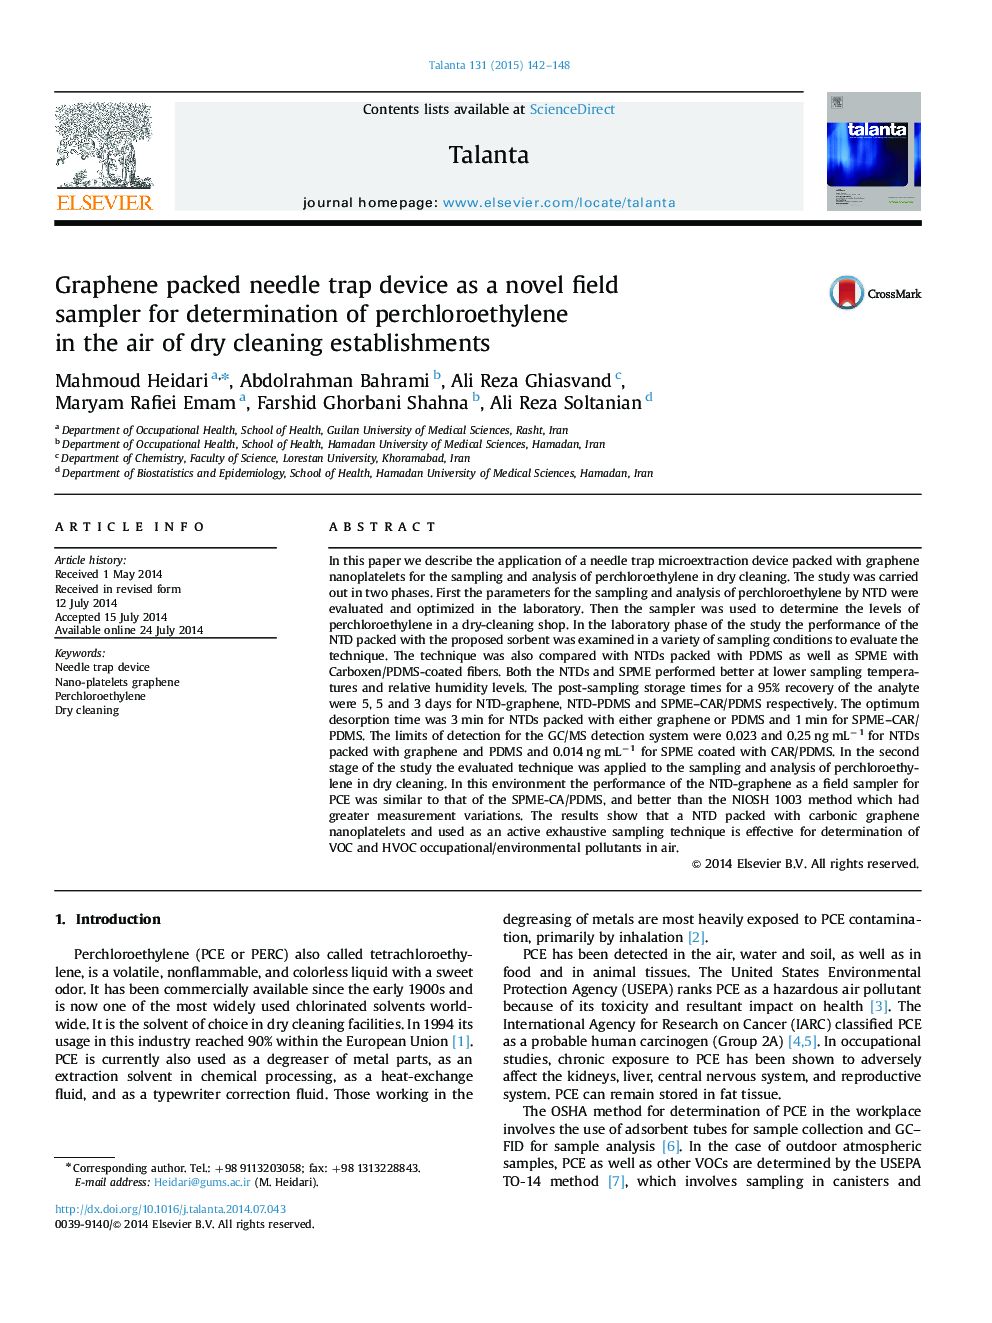 Graphene packed needle trap device as a novel field sampler for determination of perchloroethylene in the air of dry cleaning establishments